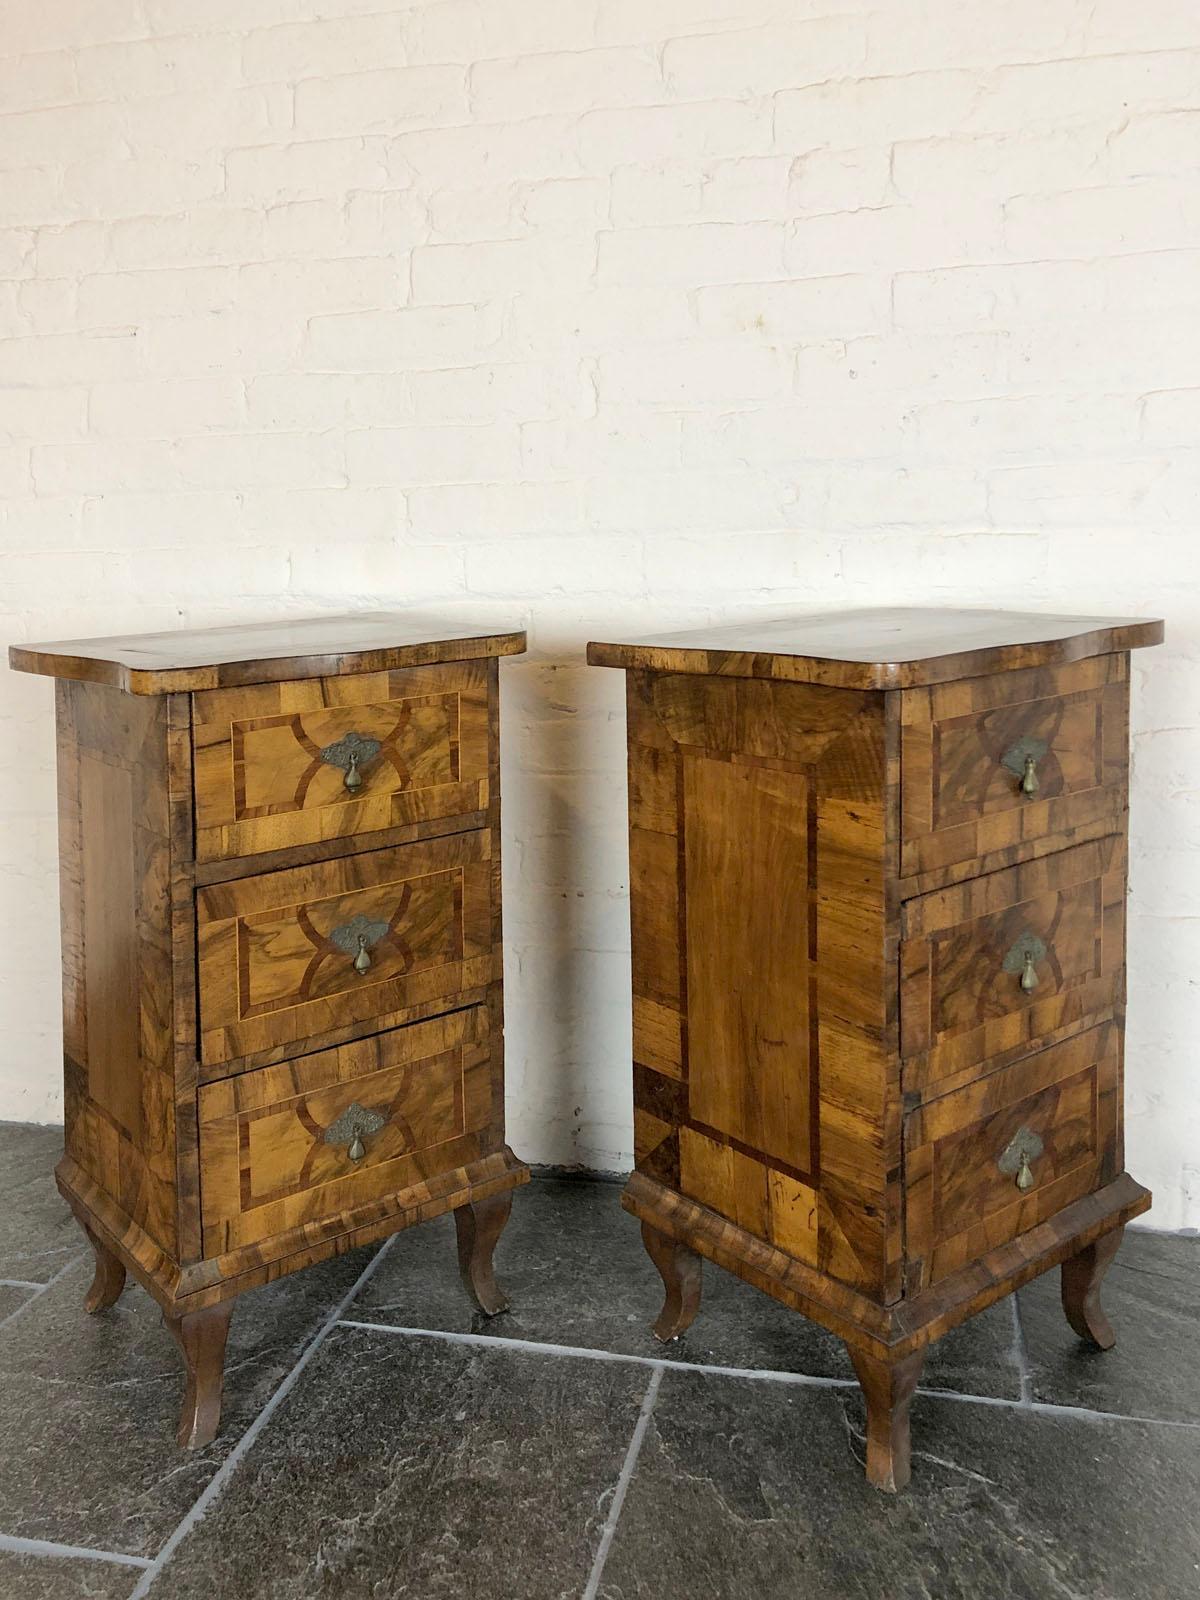 Walnut Pair of Italian Neoclassical Late 18th Century Inlaid Comodini or Night Stands For Sale